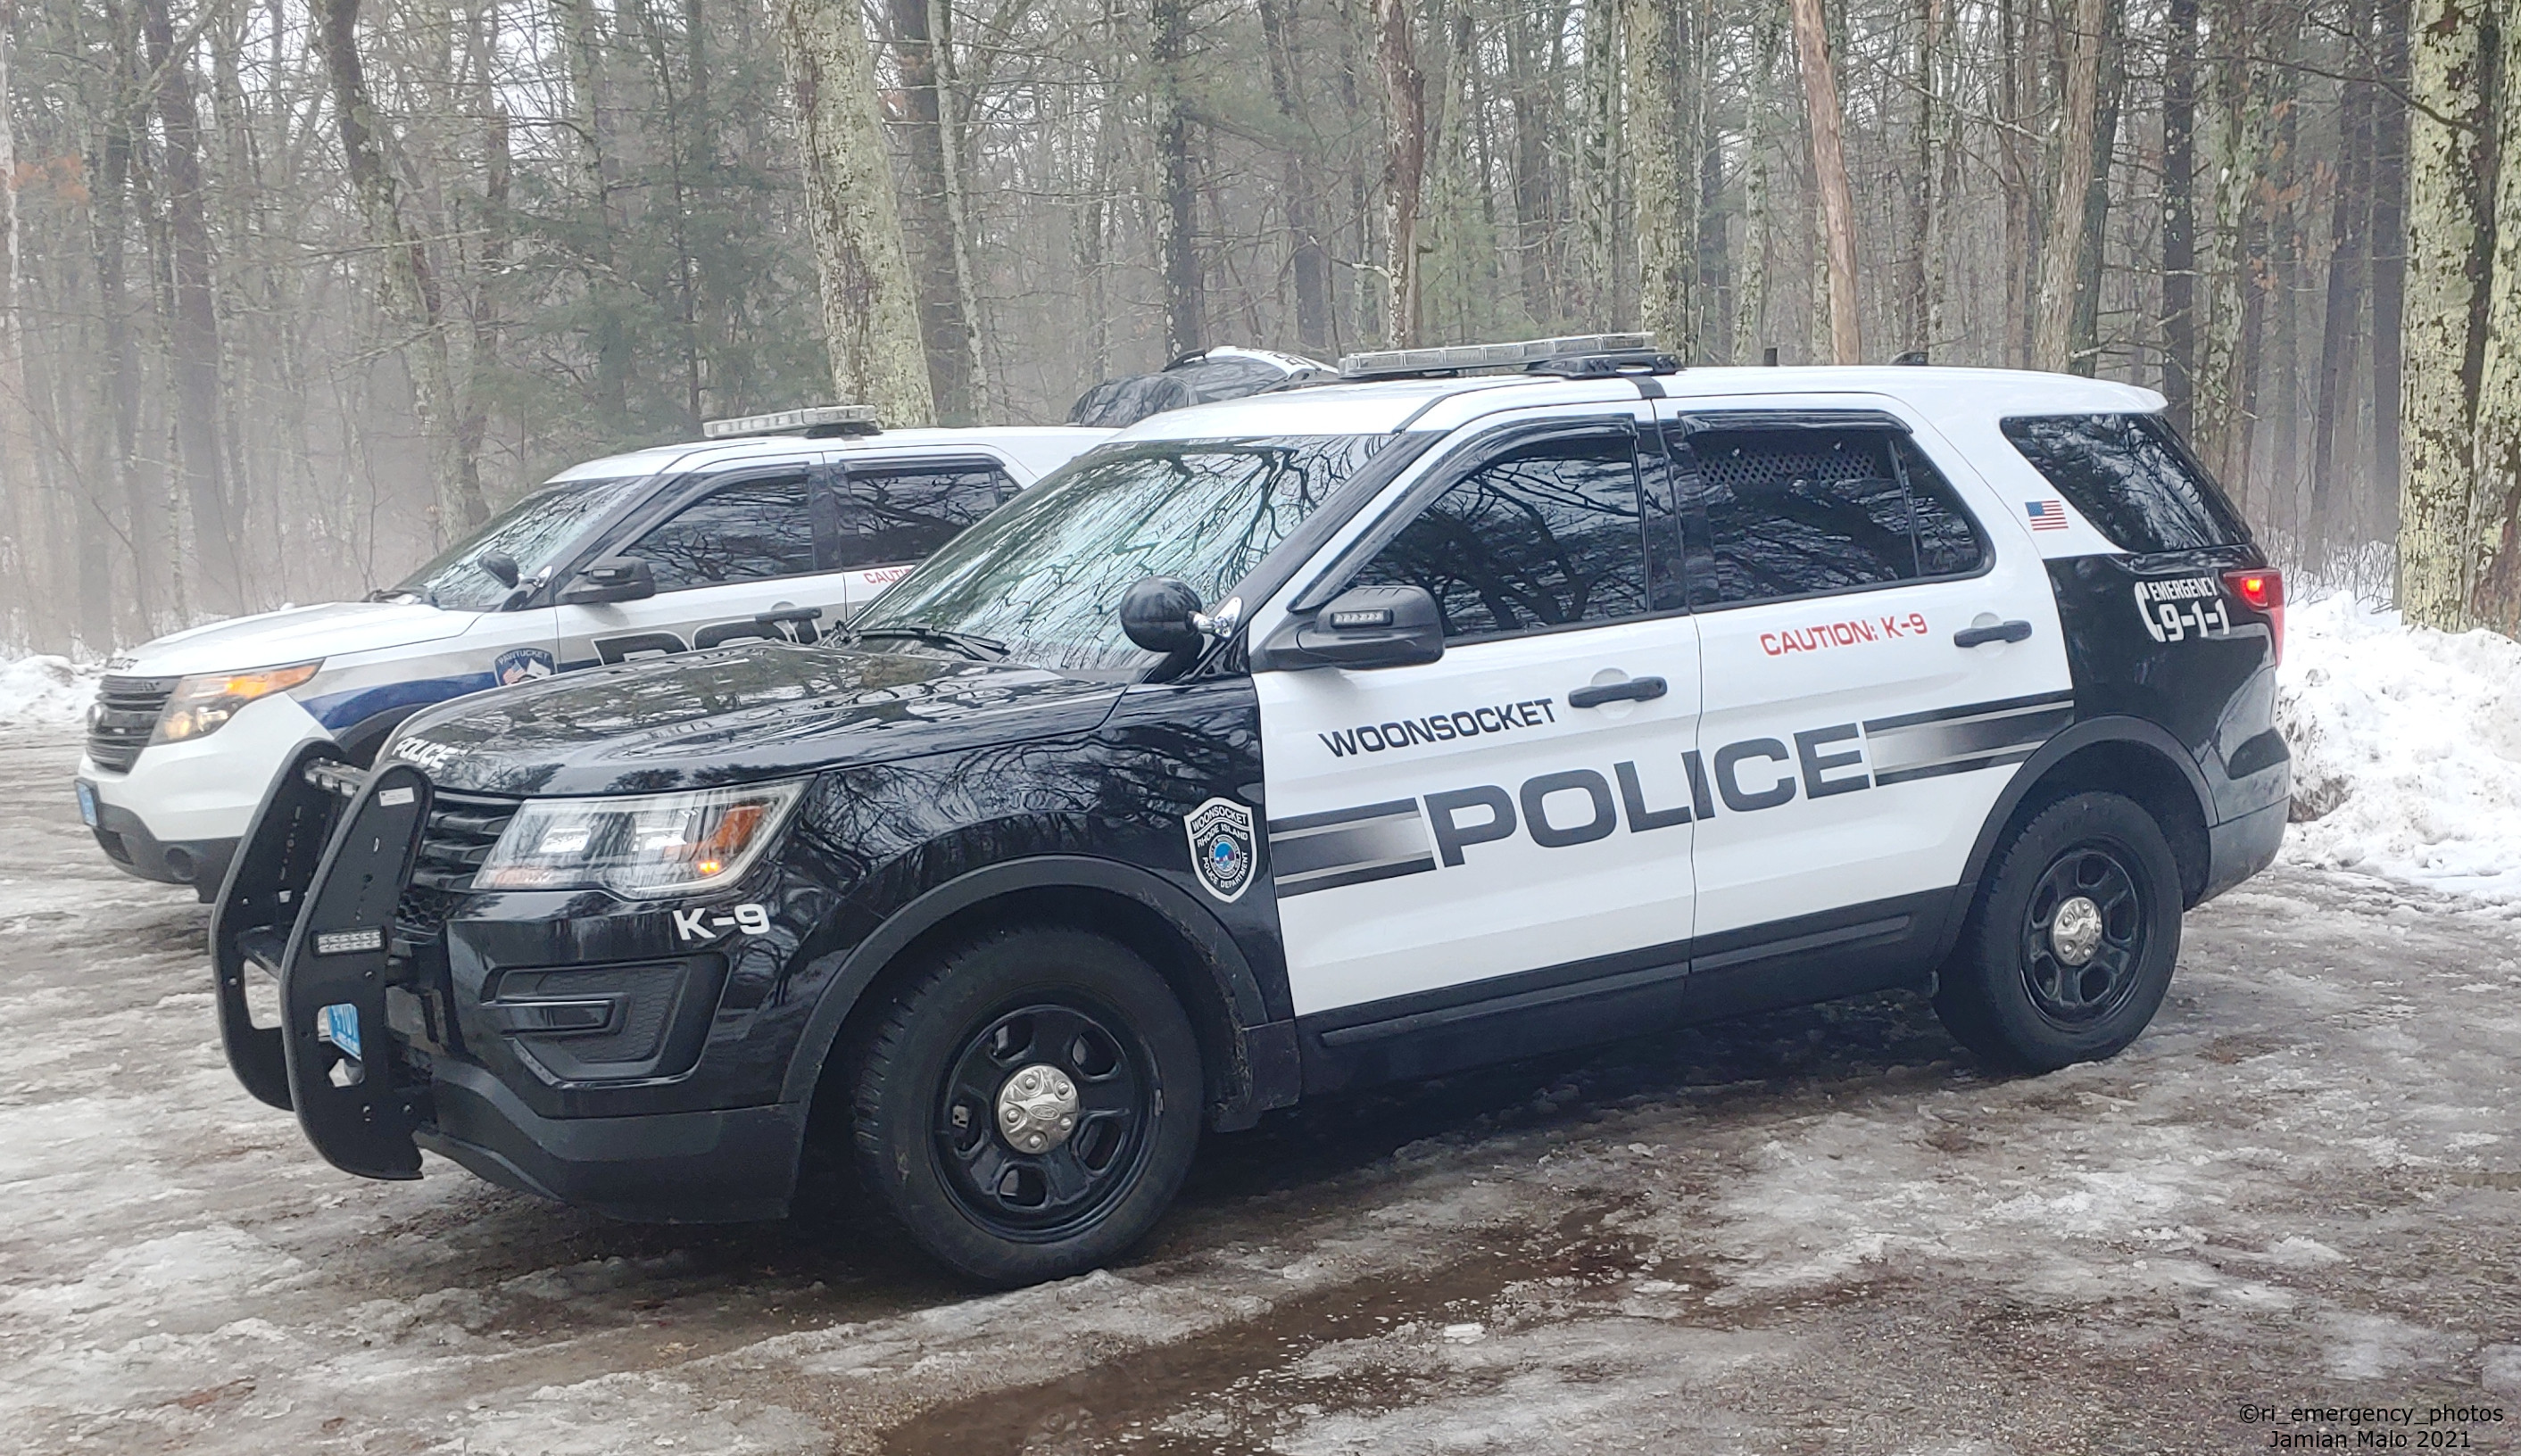 A photo  of Woonsocket Police
            K-9 Unit, a 2016-2019 Ford Police Interceptor Utility             taken by Jamian Malo